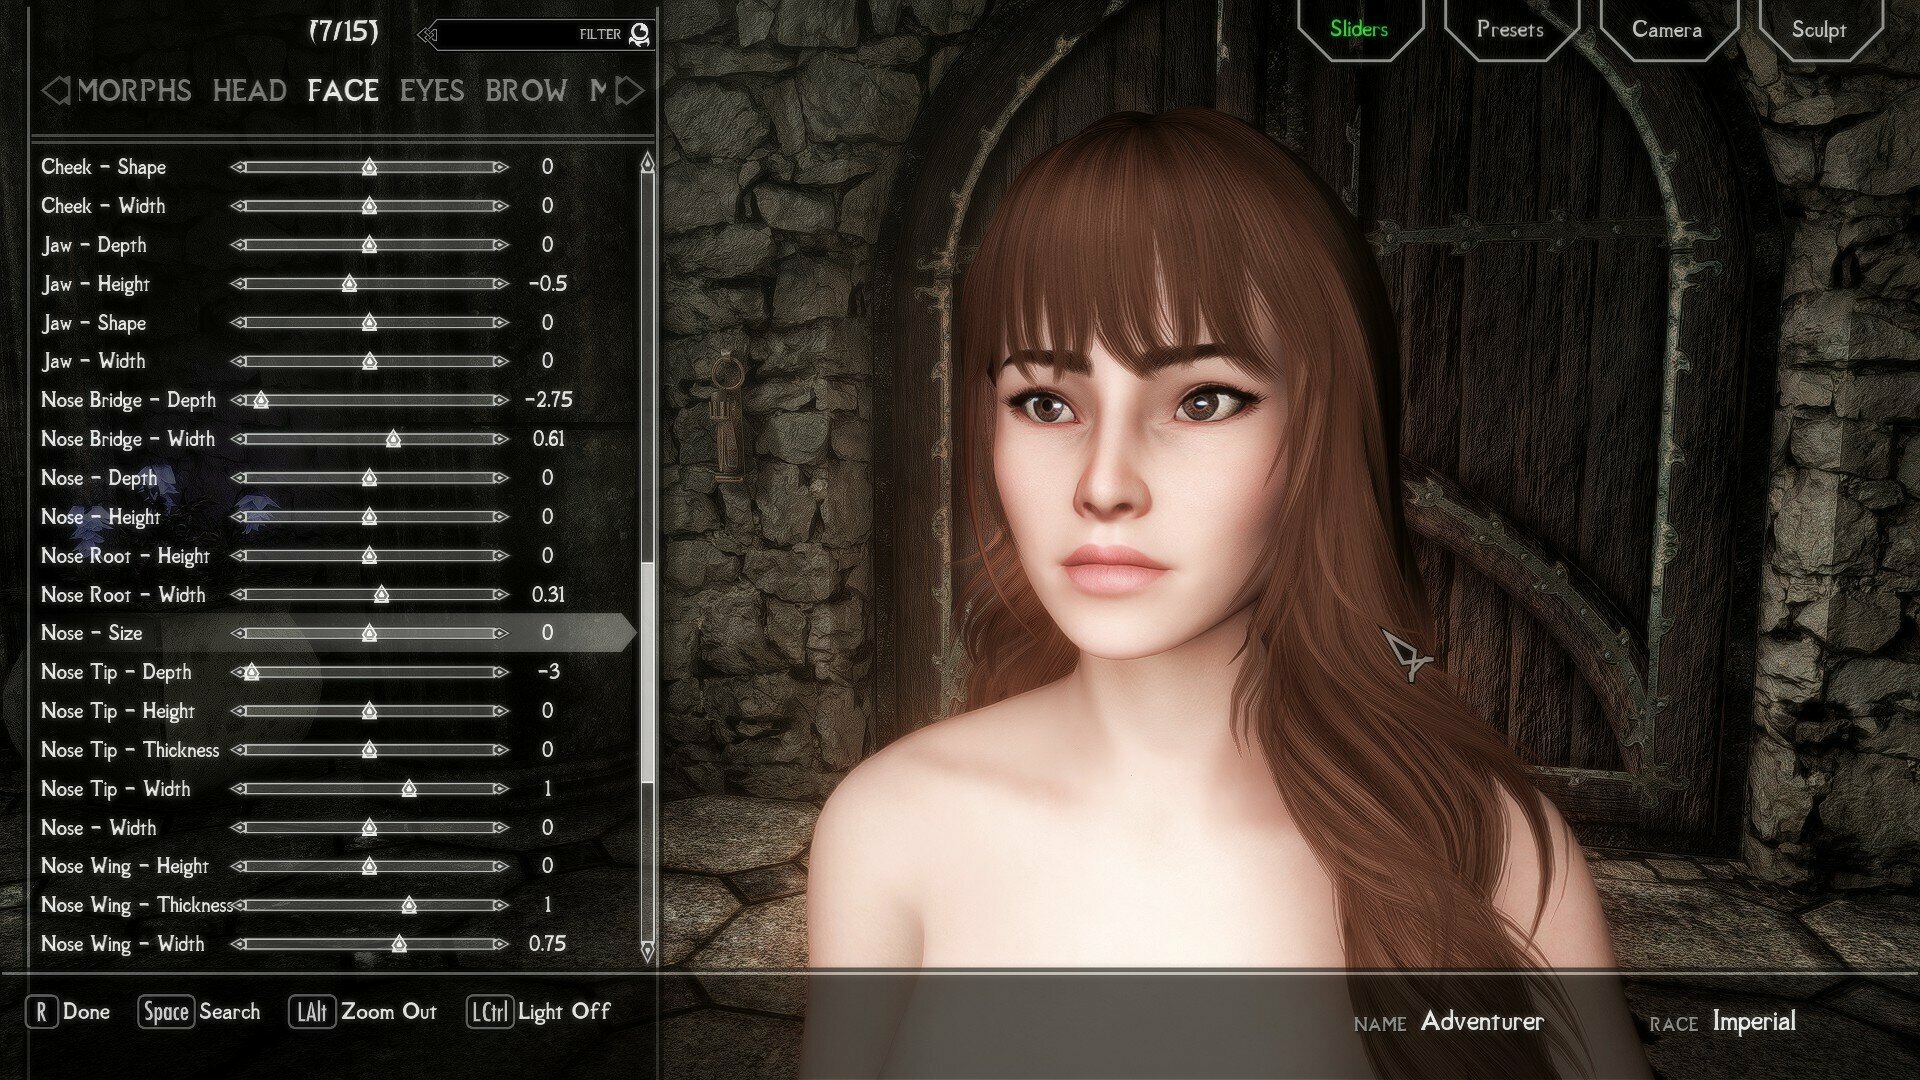 Which Mod Adds These Sliders To Racemenu Request And Find Skyrim Special Edition Loverslab